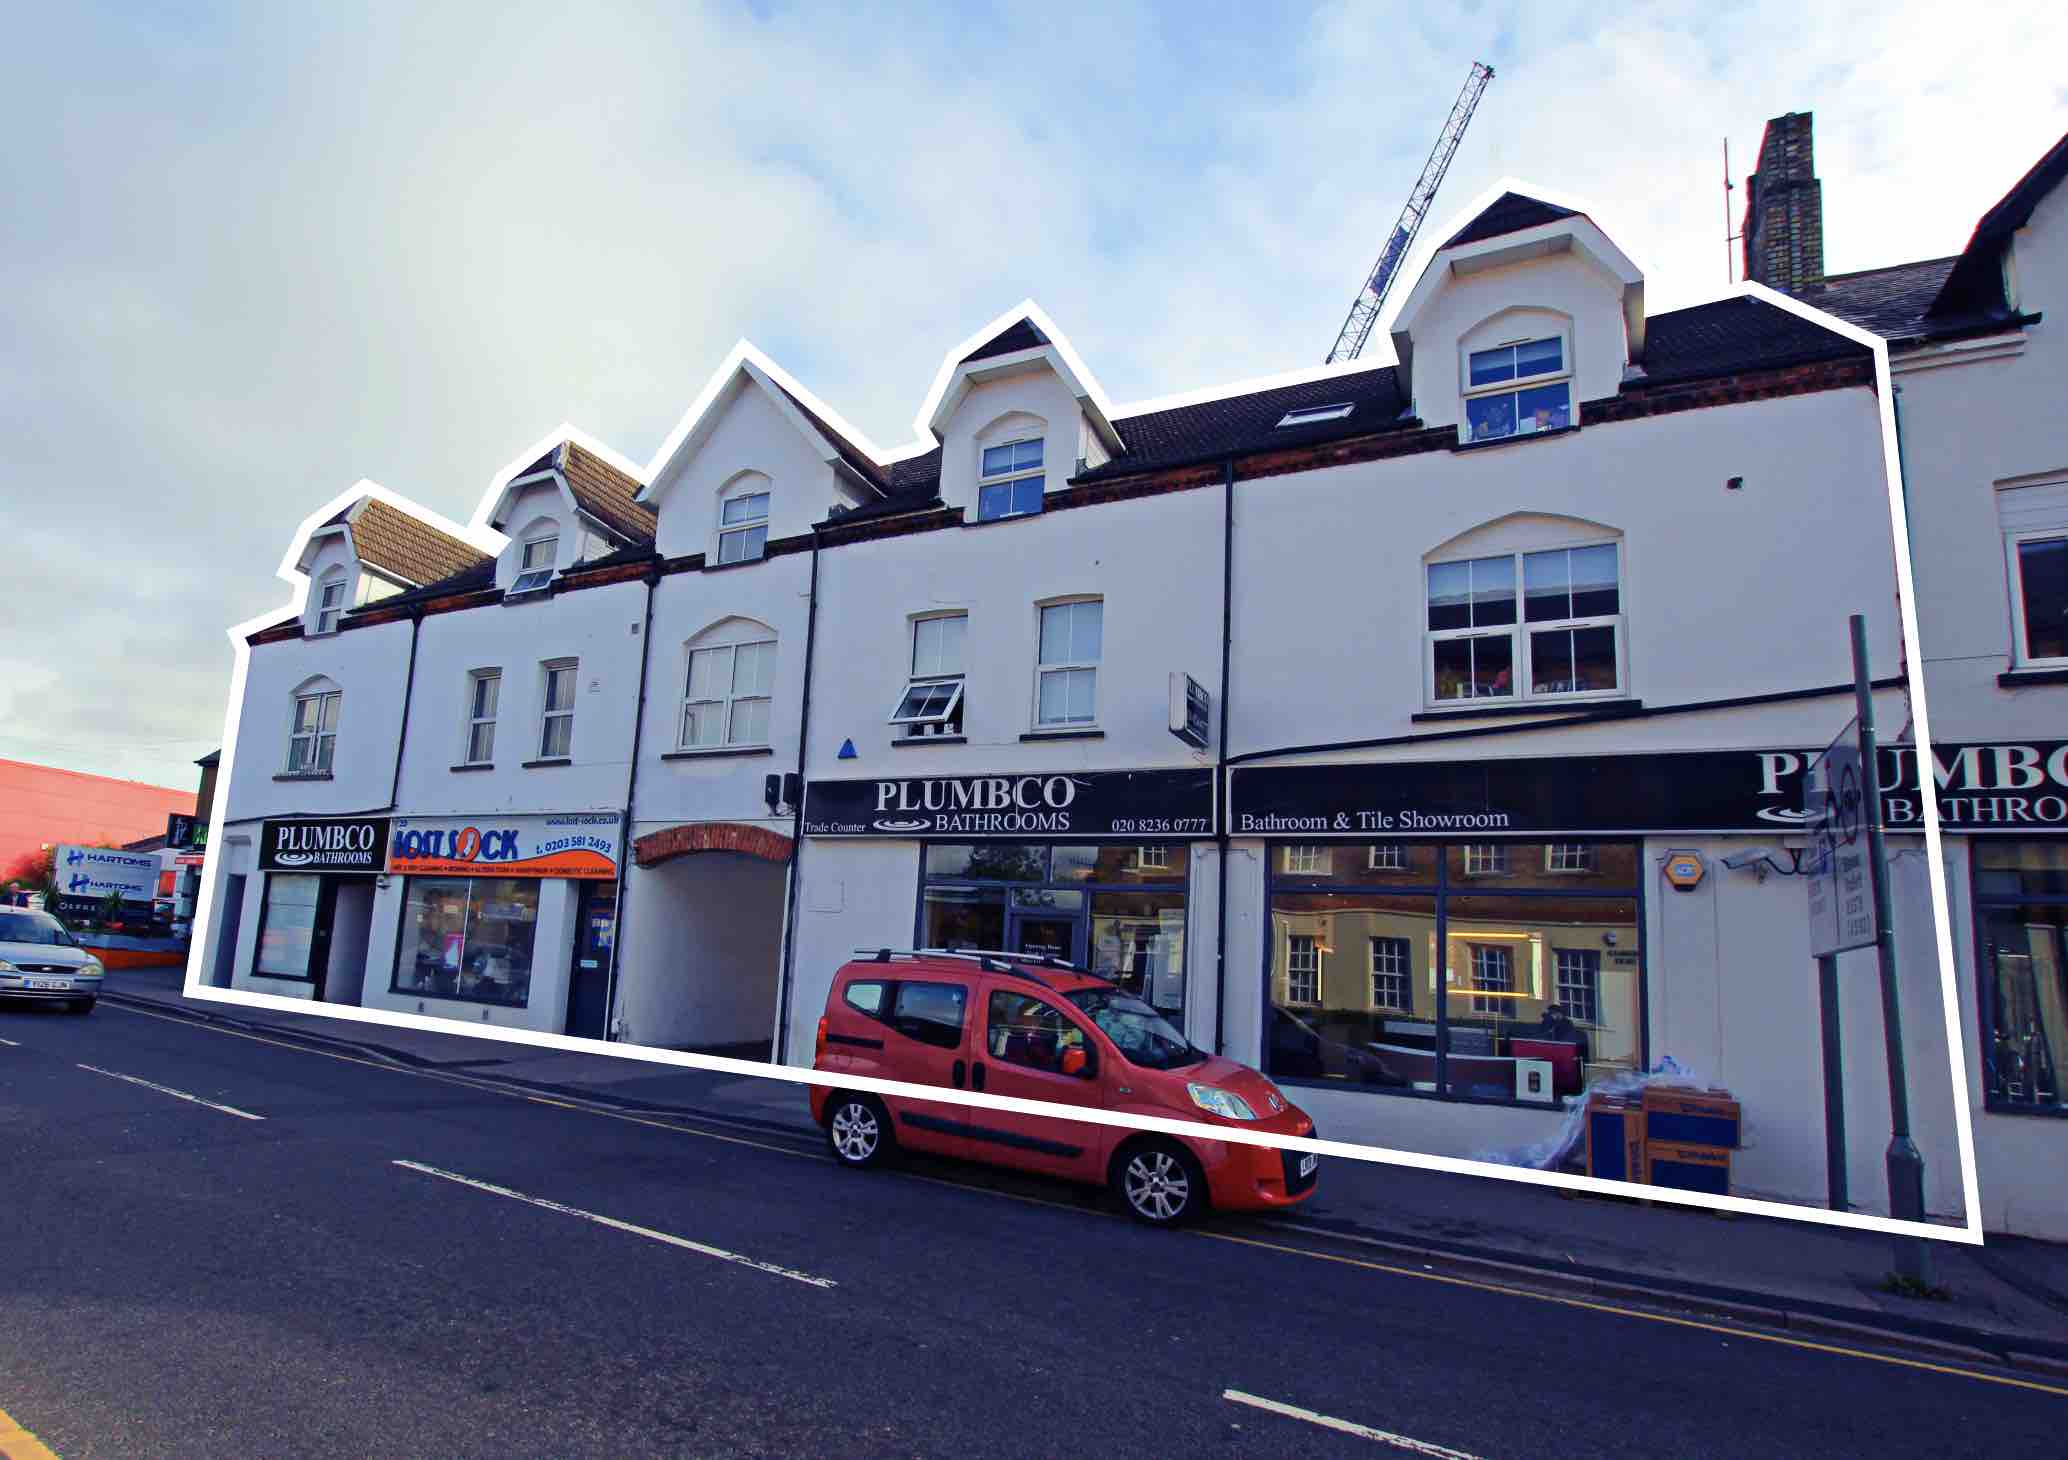 Mixed-Use Income Producing Building in Borehamwood